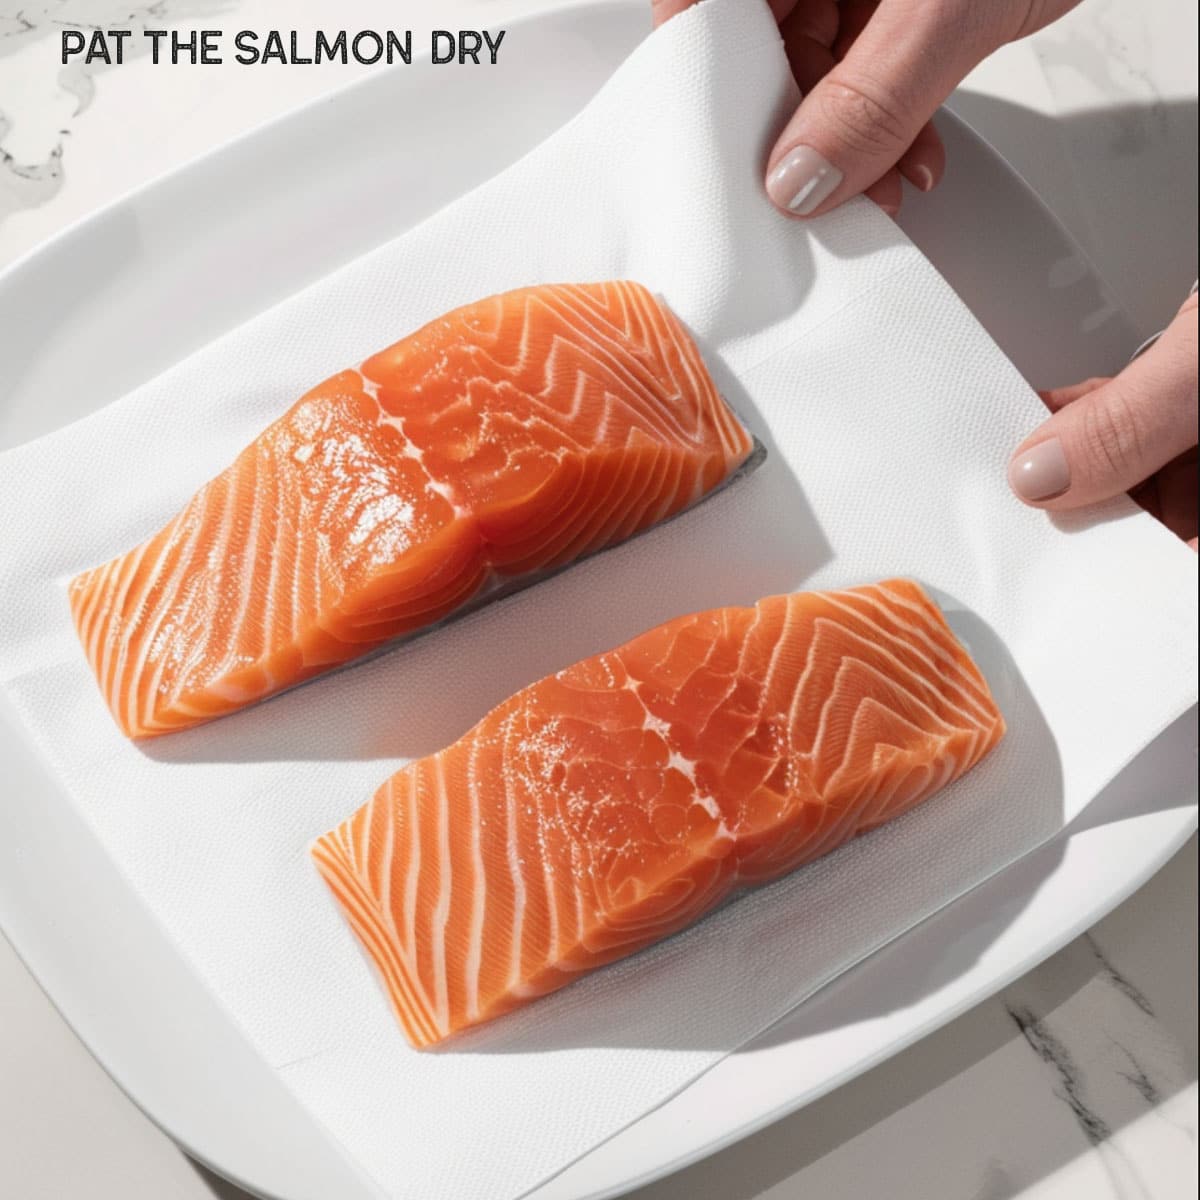 Don't skip this step! Patting your salmon dry is key for a perfect pan-sear